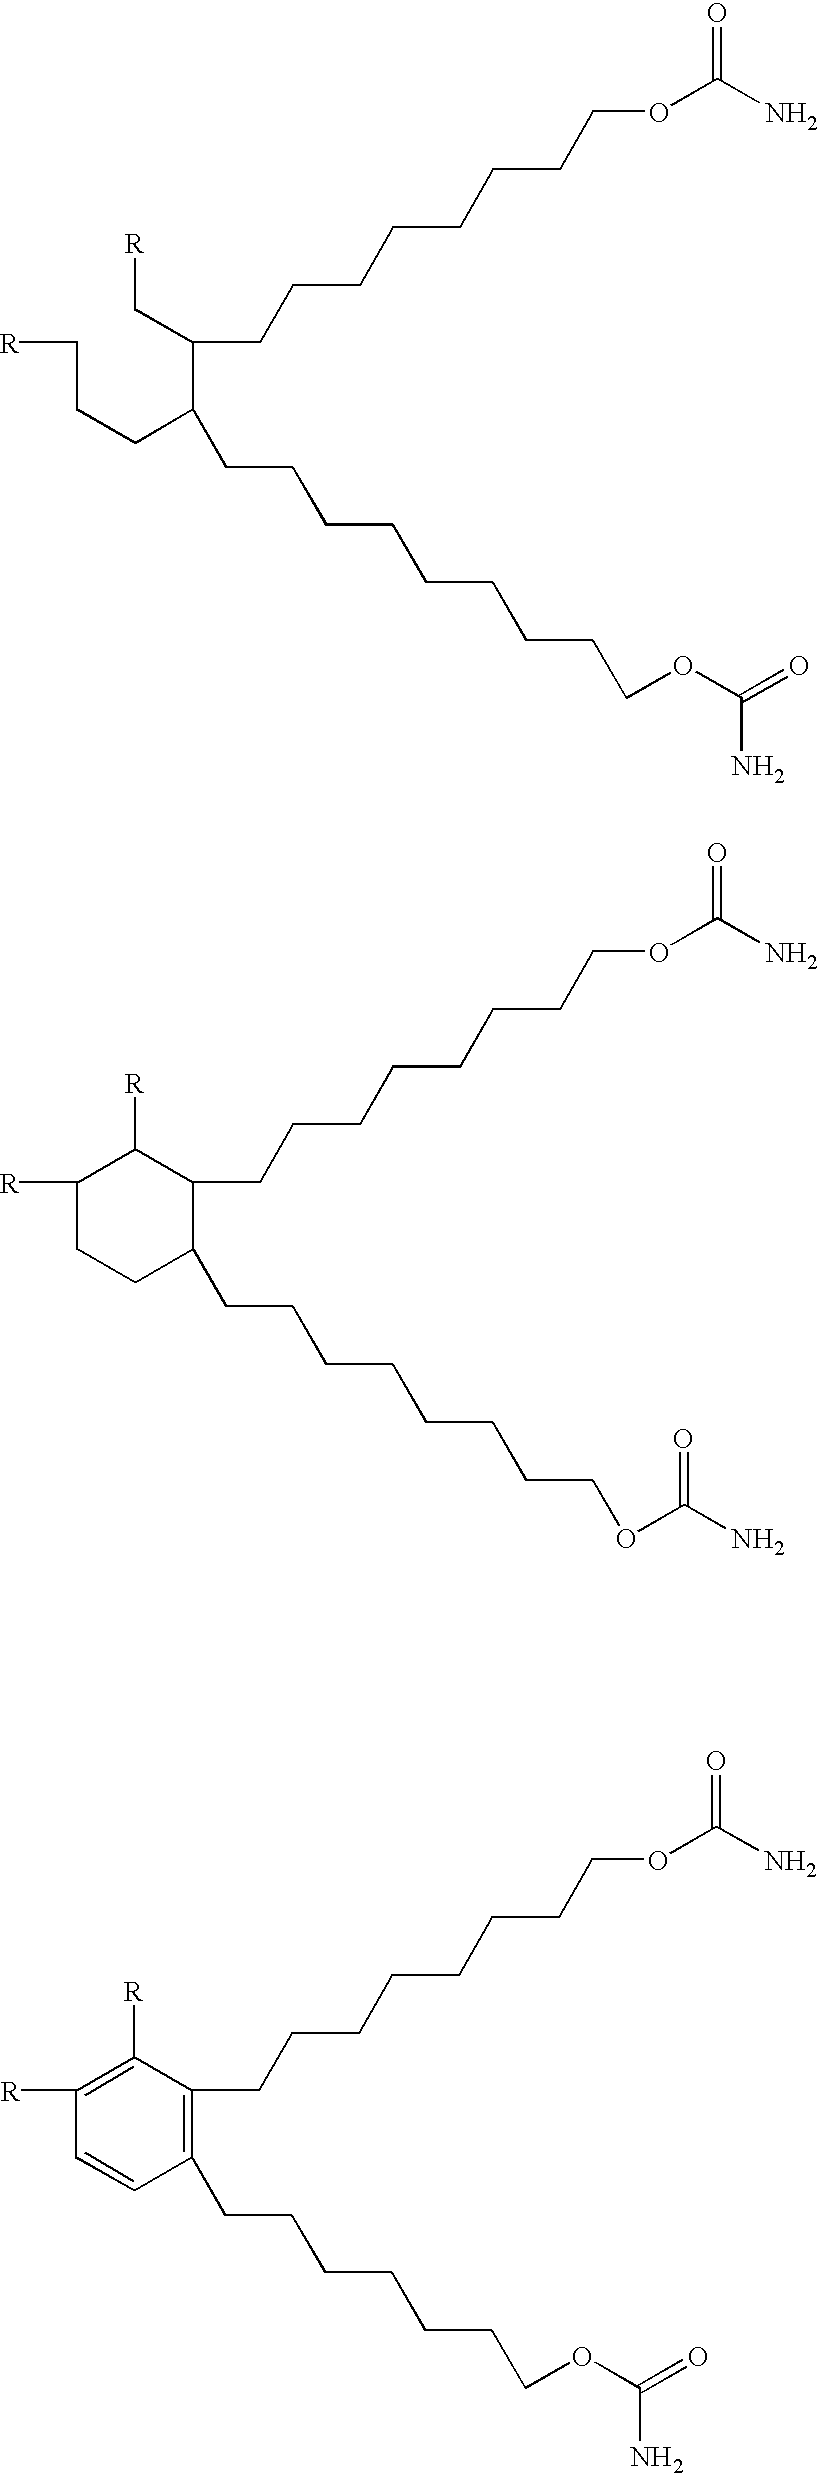 Coating composition containing crosslinkable monomeric difunctional compounds having at least thirty carbon atoms